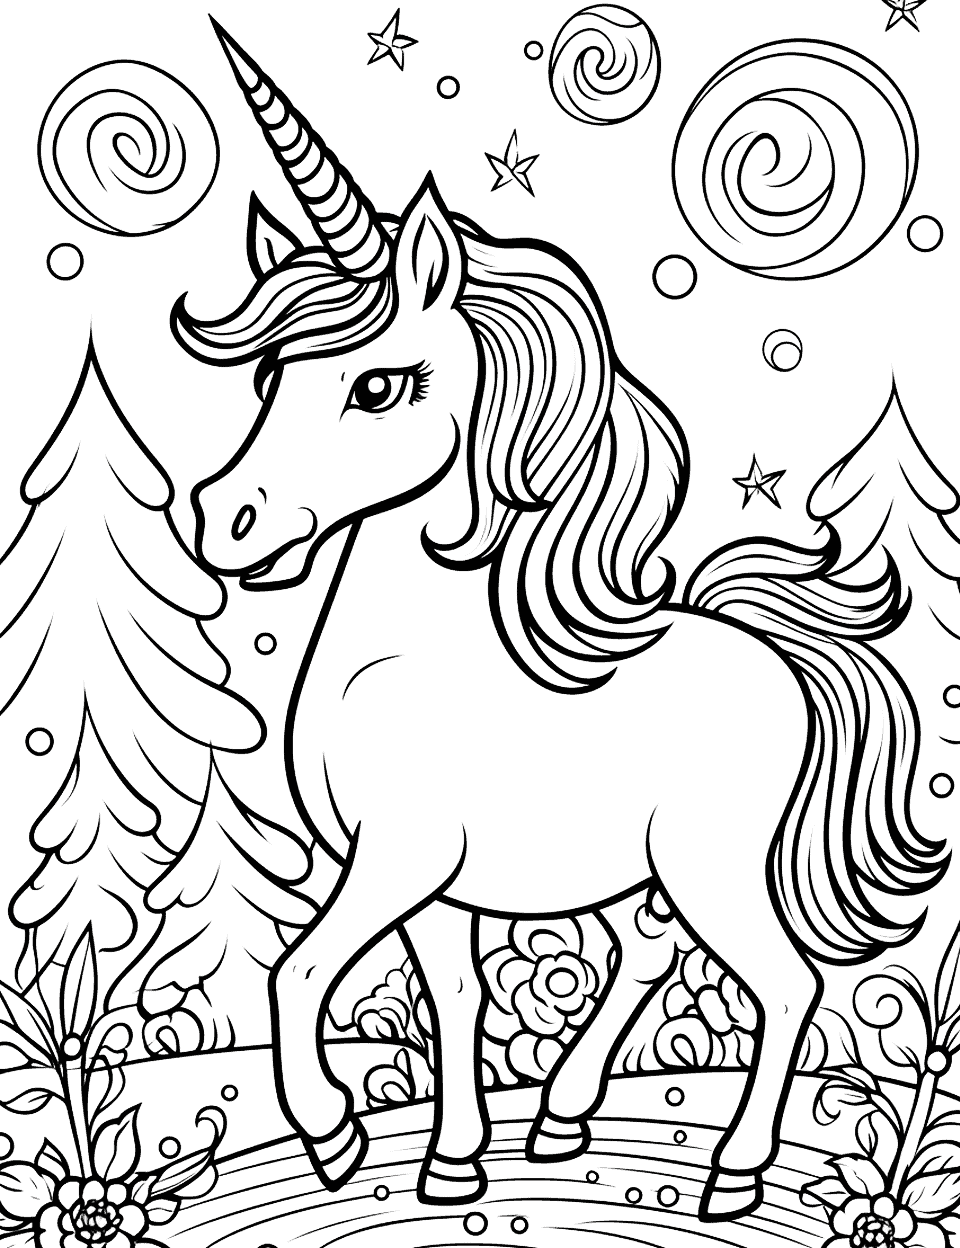 Unicorn and the Forest Coloring Page - A unicorn exploring a forest.